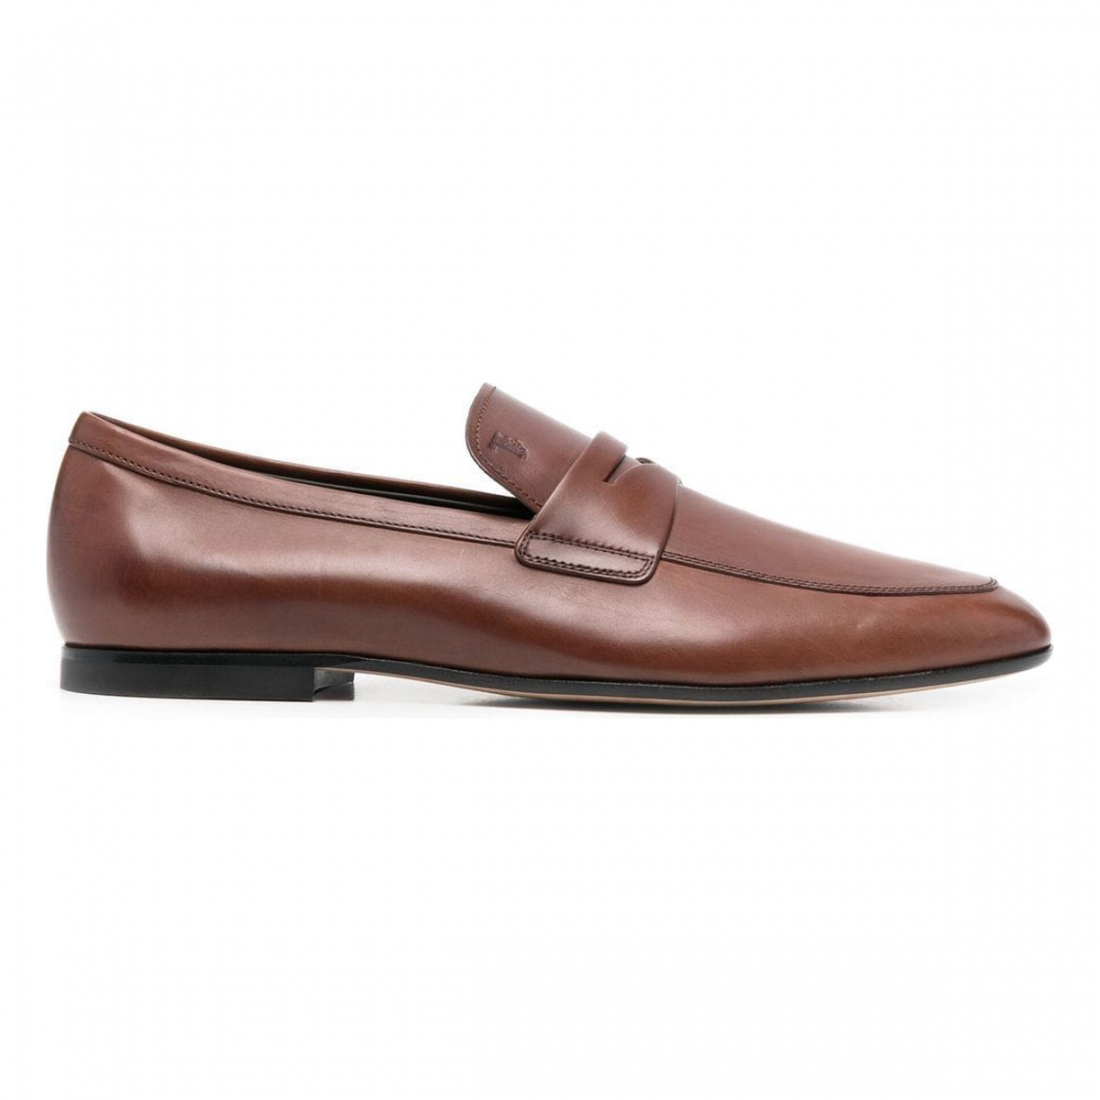 Men's 'Penny Strap' Loafers